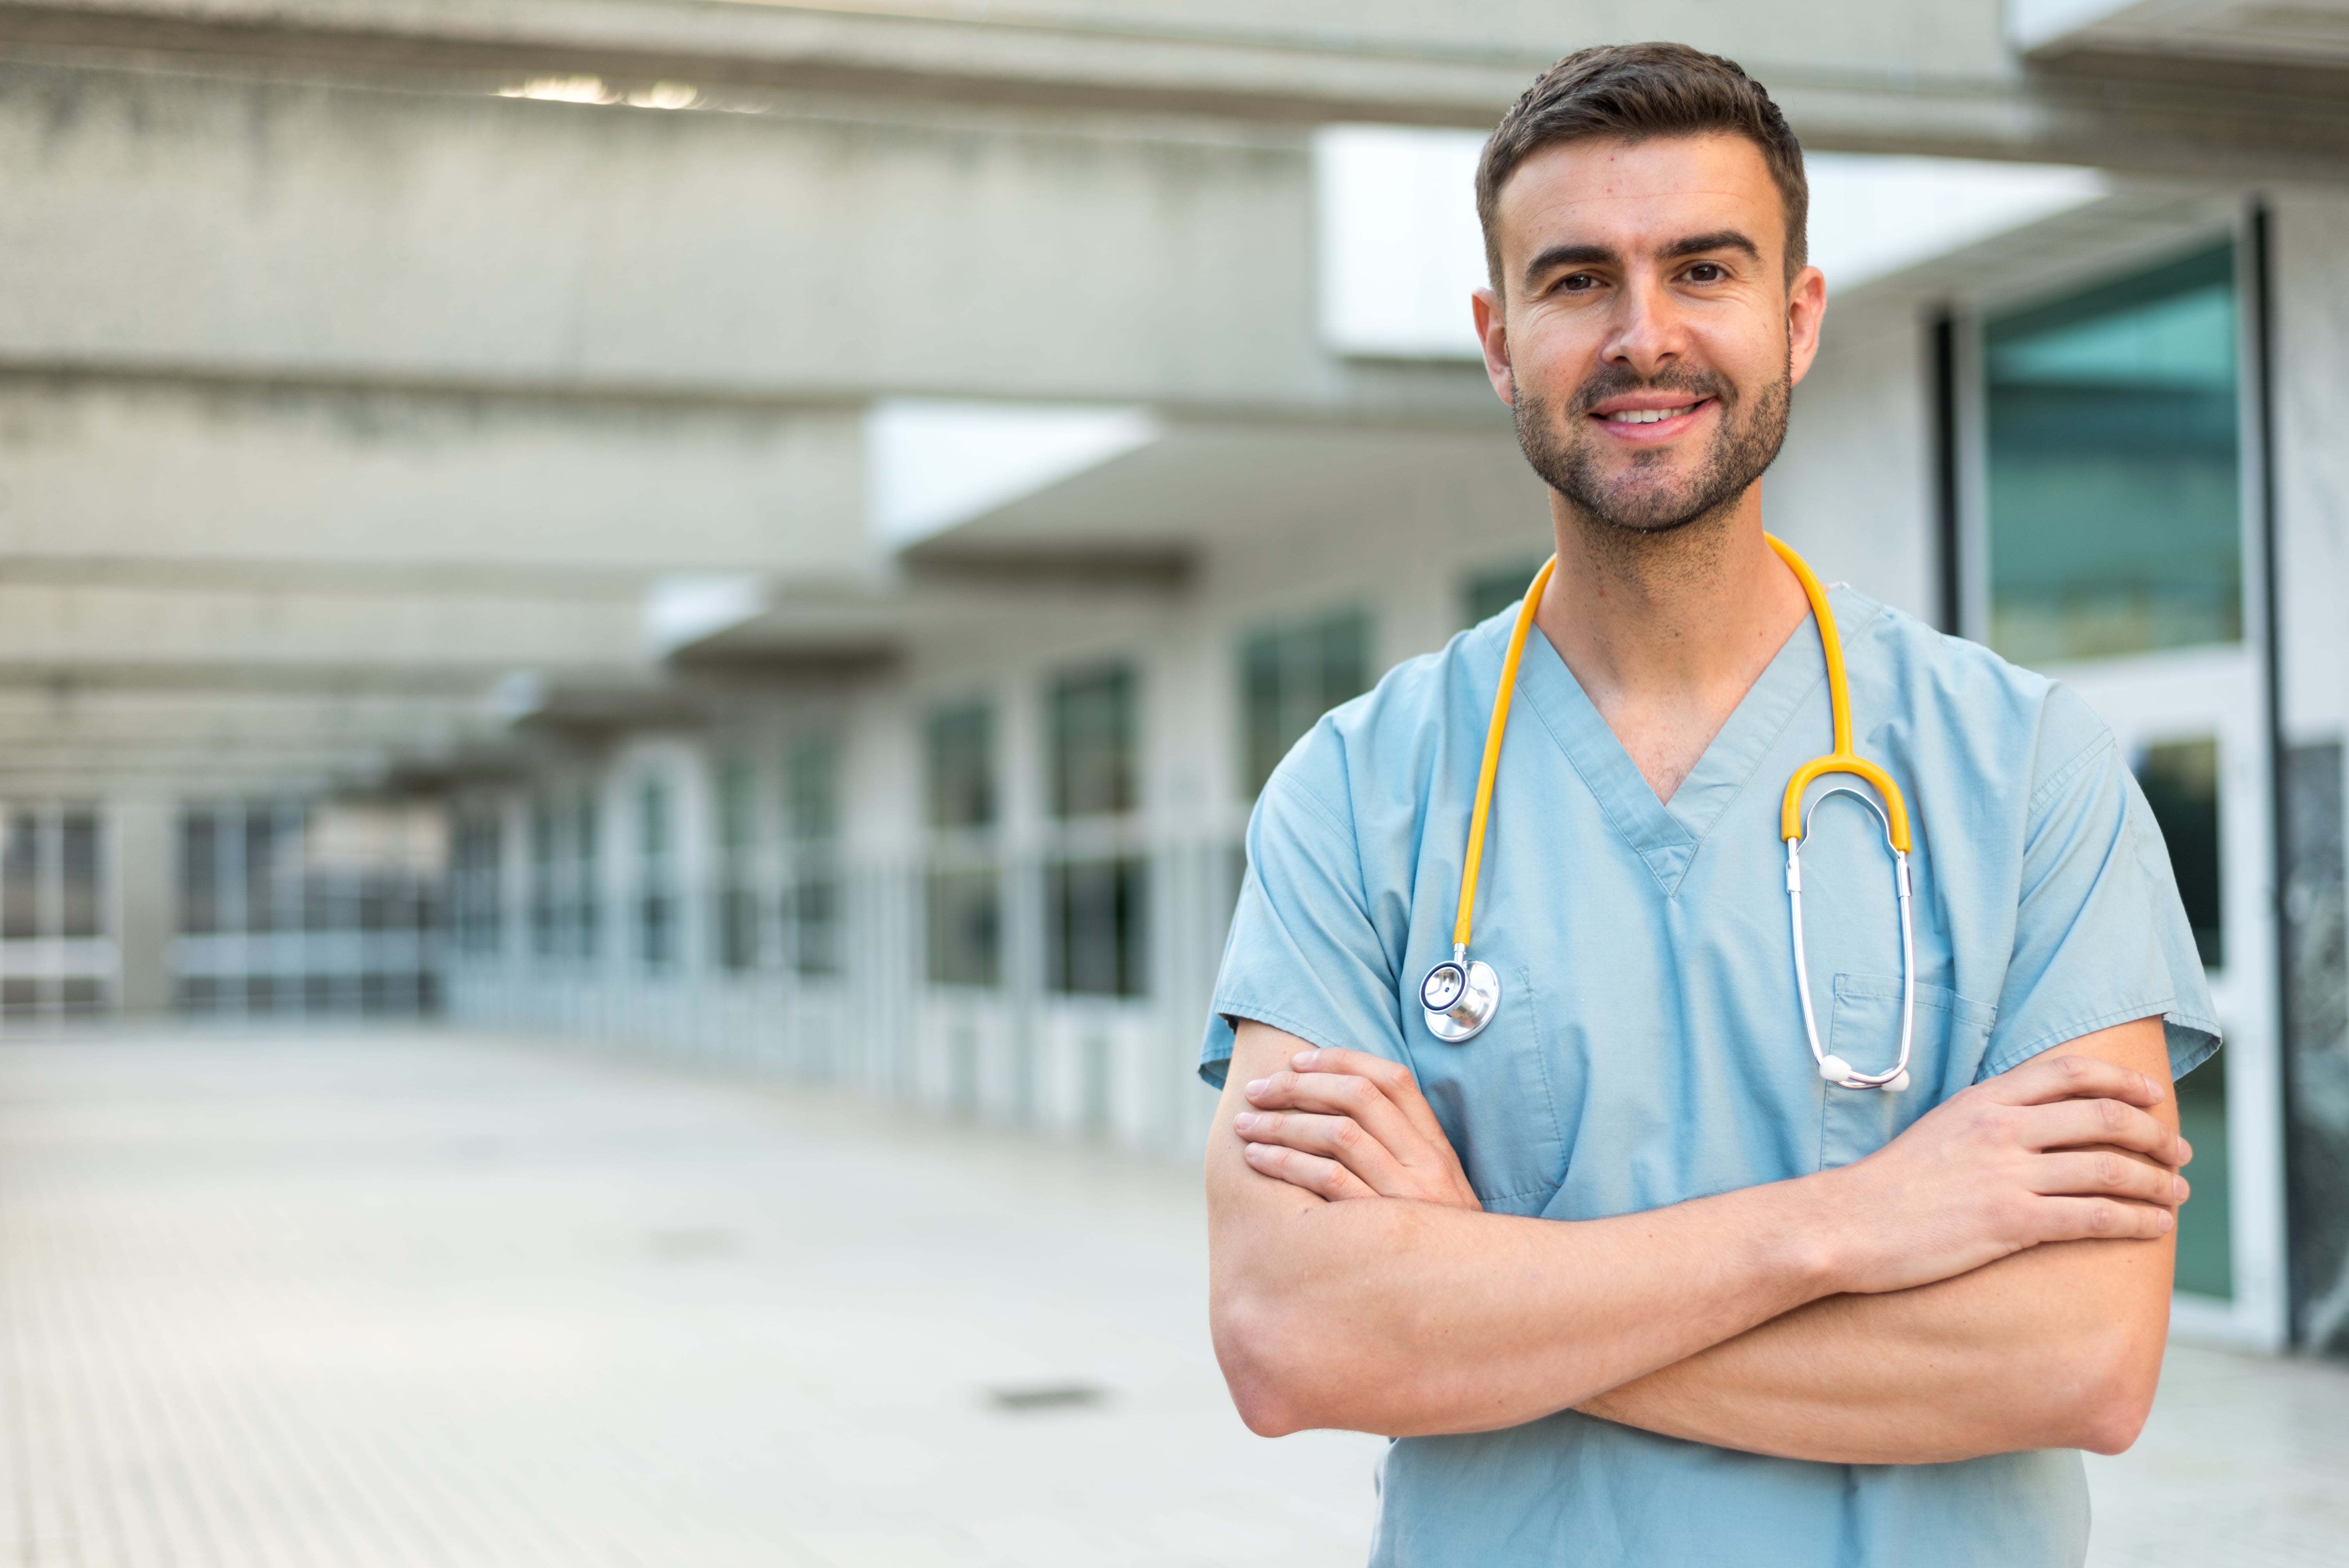 5 Things to Know About Nurse Practitioners